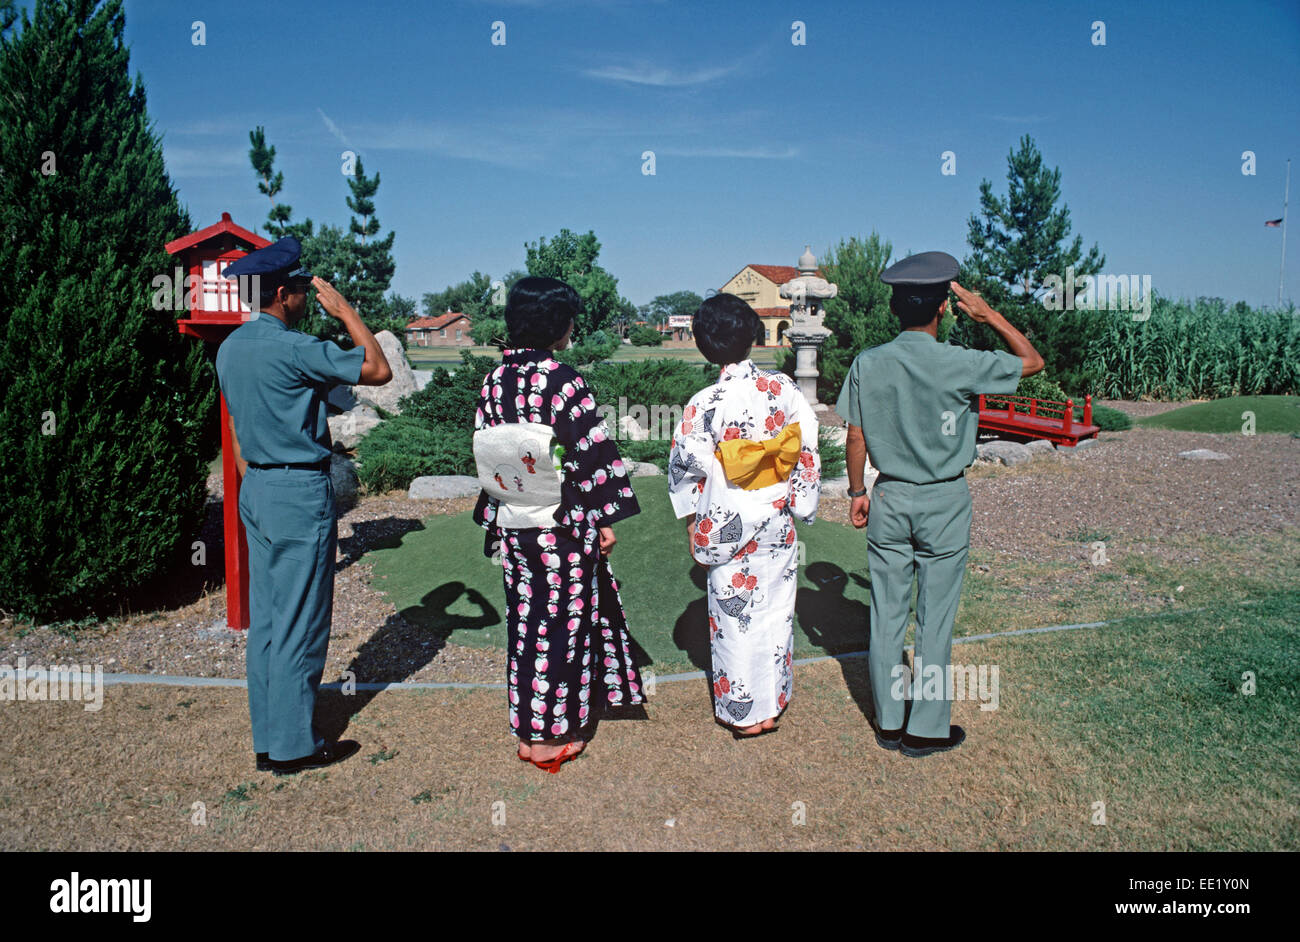 JAPANESE MILITARY PERSONNEL AND WIVES SALUTING THE RAISING OF THE FLAG IN JAPANESE GARDEN, FORT BLISS, TEXAS, UNITED STATES ARMY, USA Stock Photo